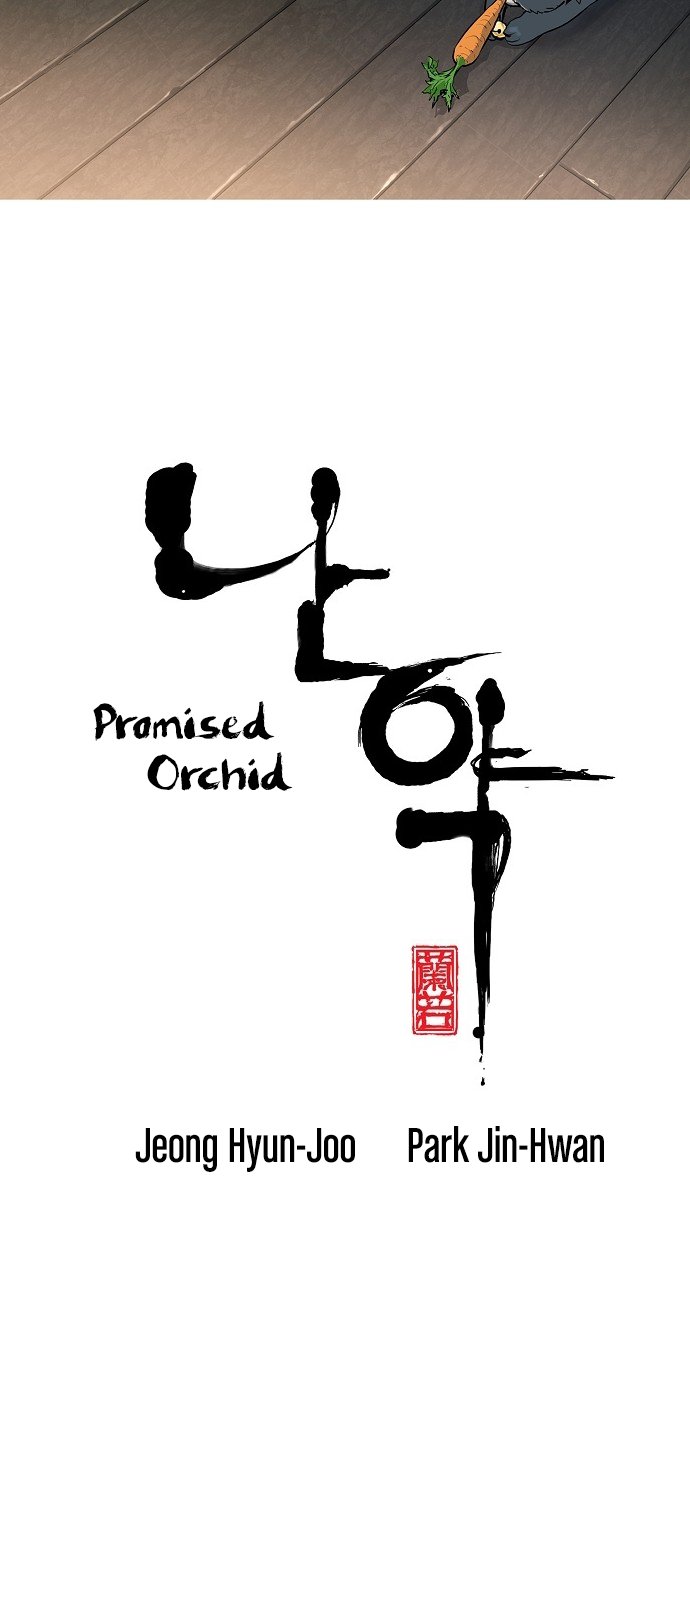 Promised Orchid image